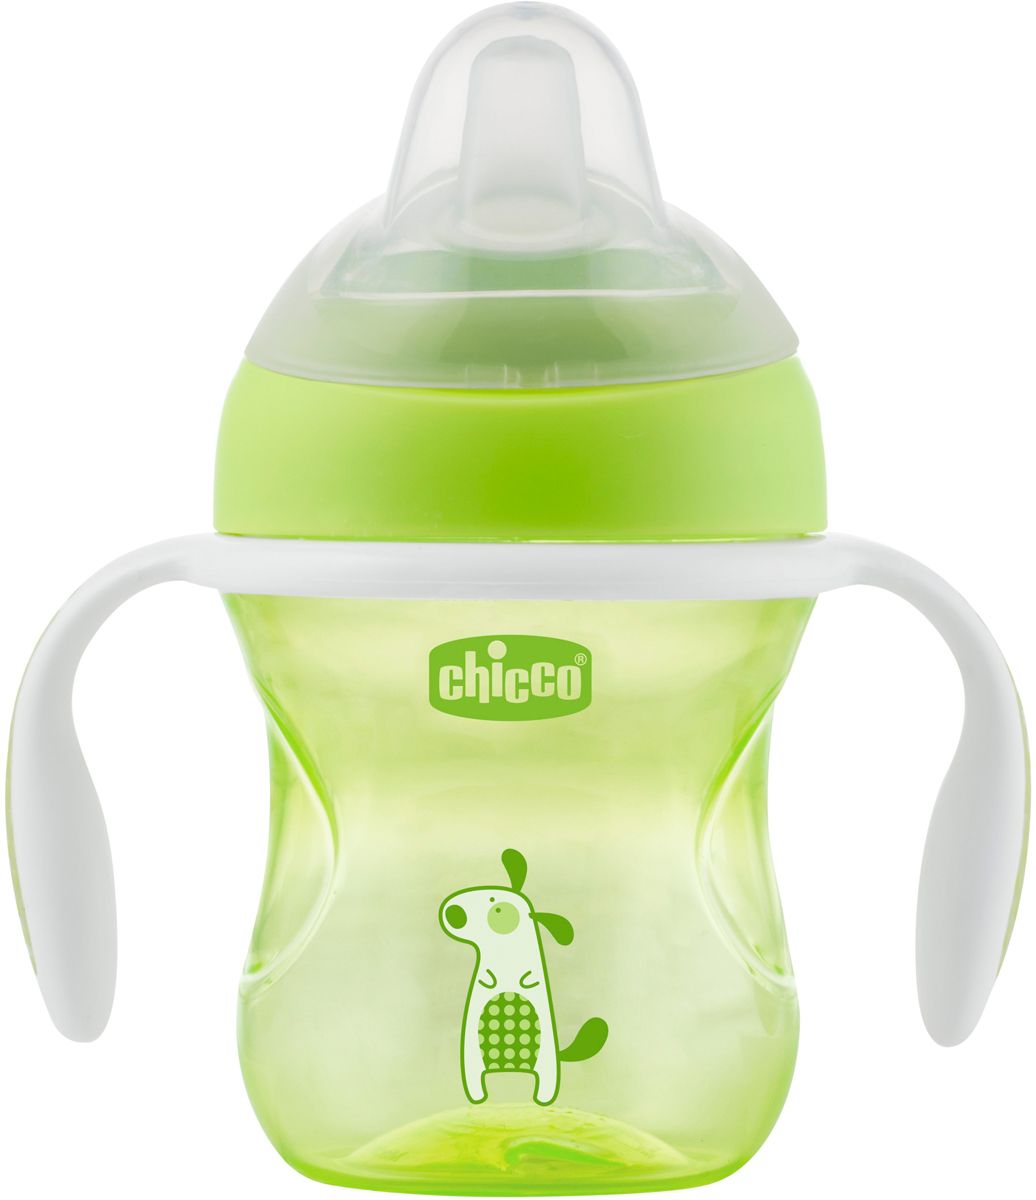 Chicco - Transition Cup  4    200 